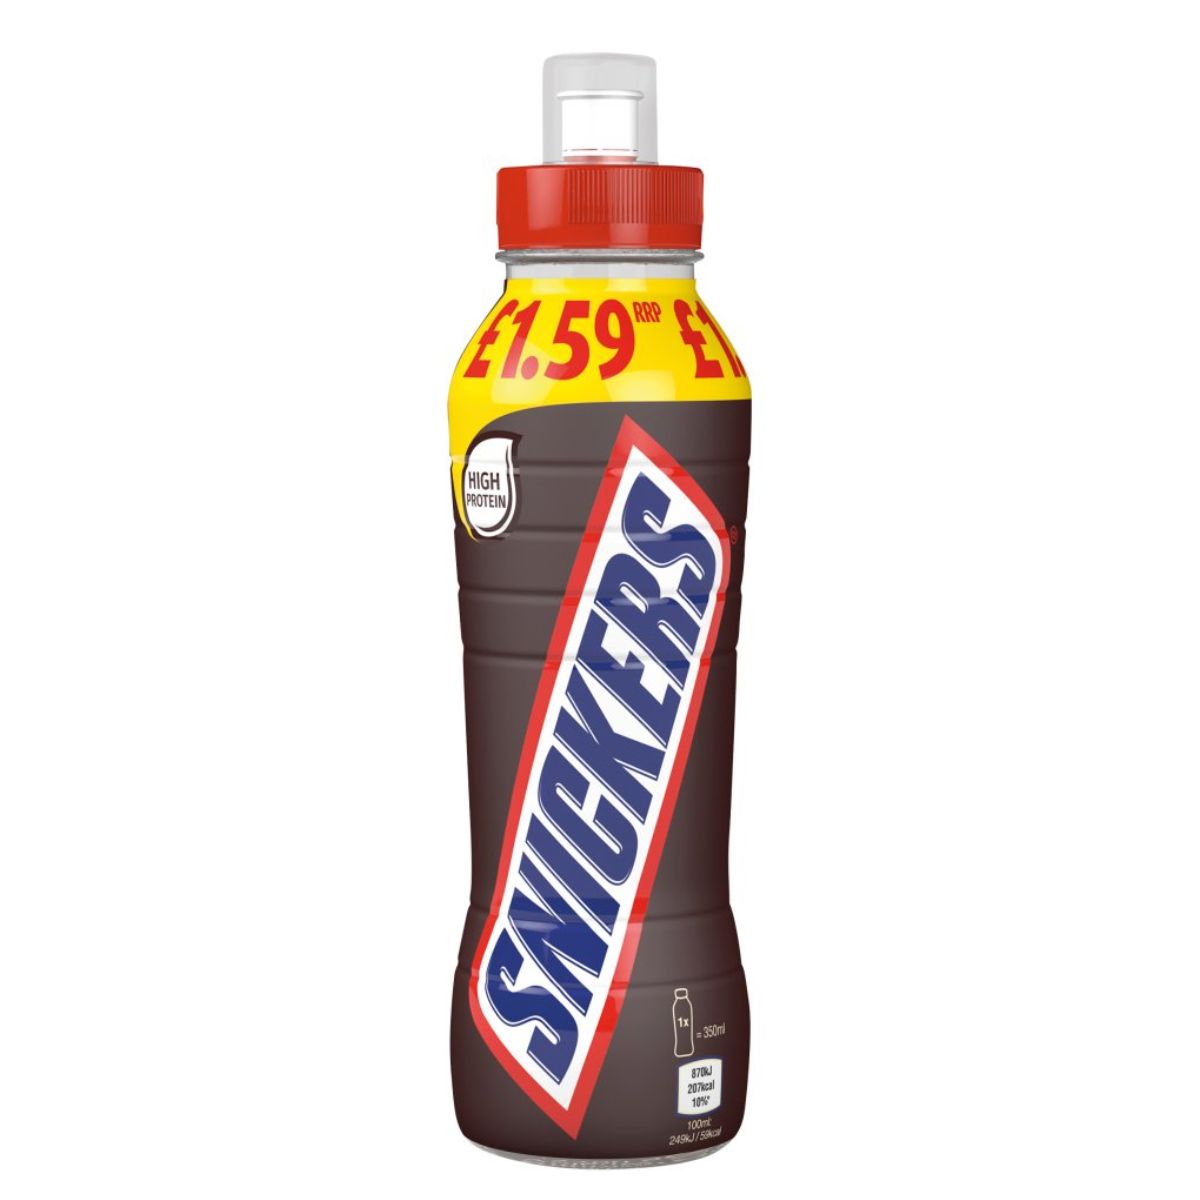 A bottle of Snickers - Chocolate Milk Shake Drink - 350ml on a white background.